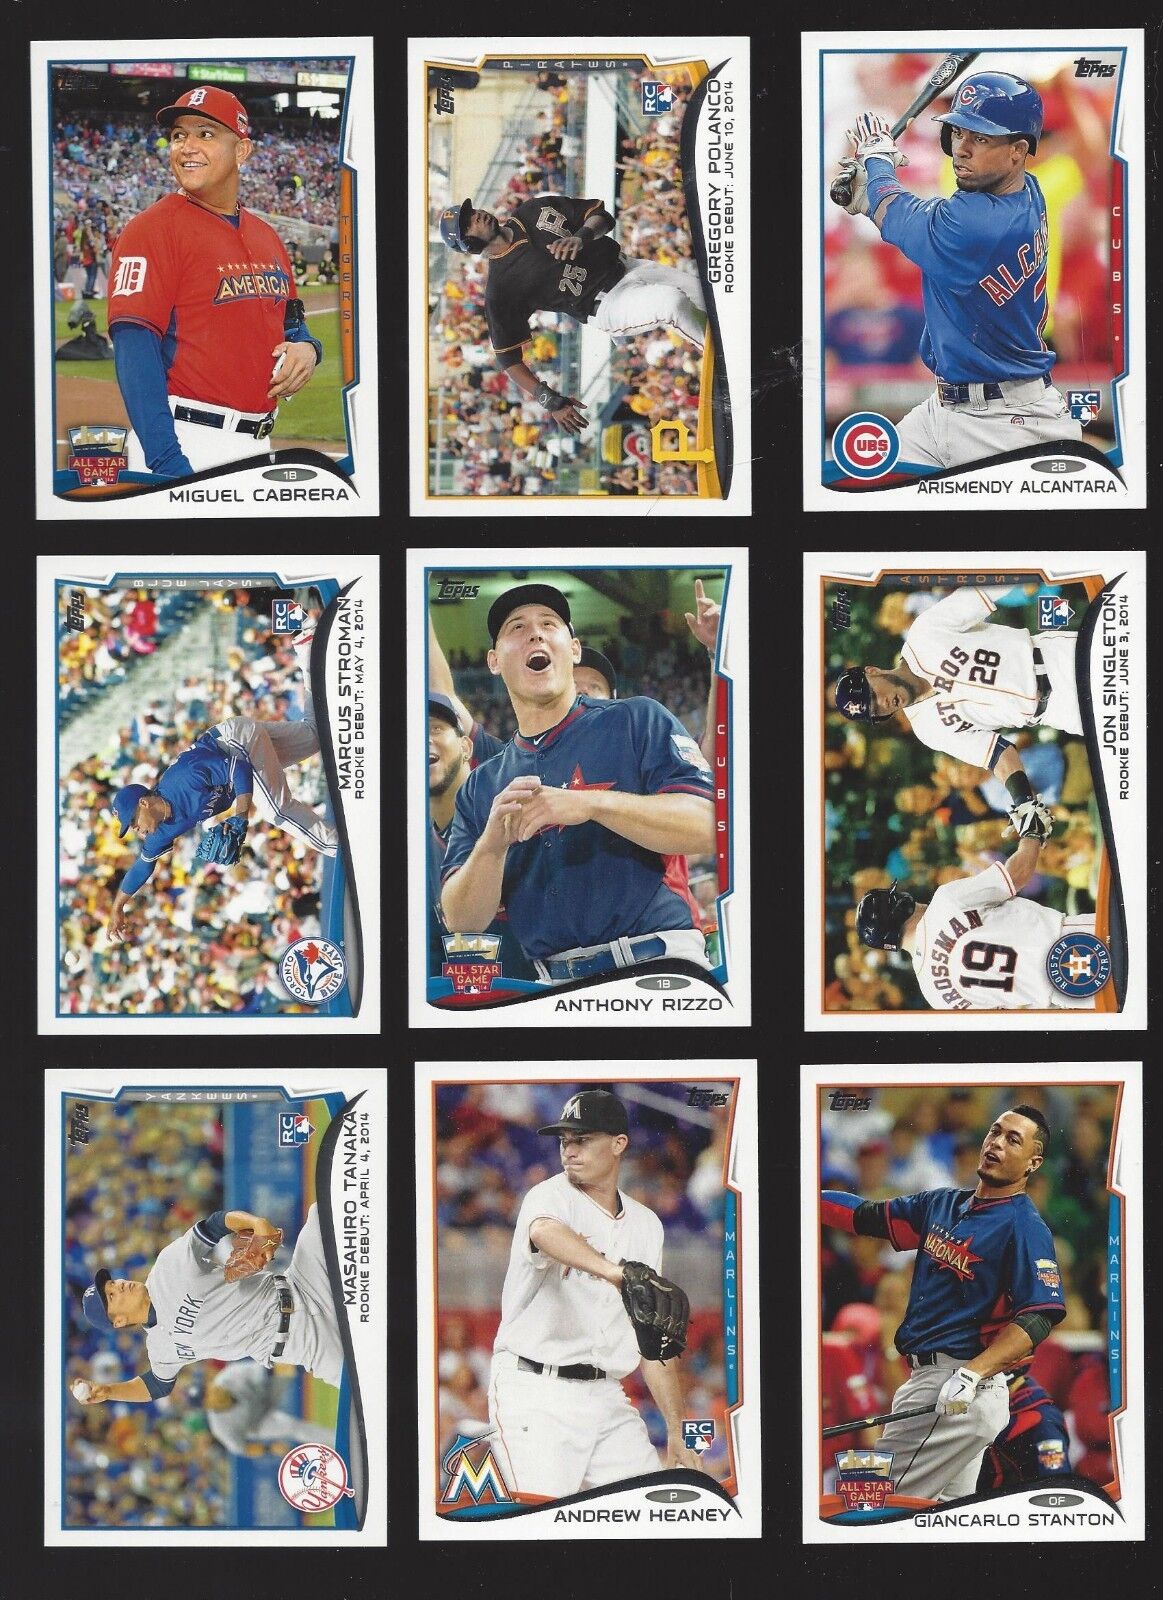 2014 TOPPS UPDATE #\'s 90-330 ( ROOKIE RC\'s, STARS ) - WHO DO YOU NEED